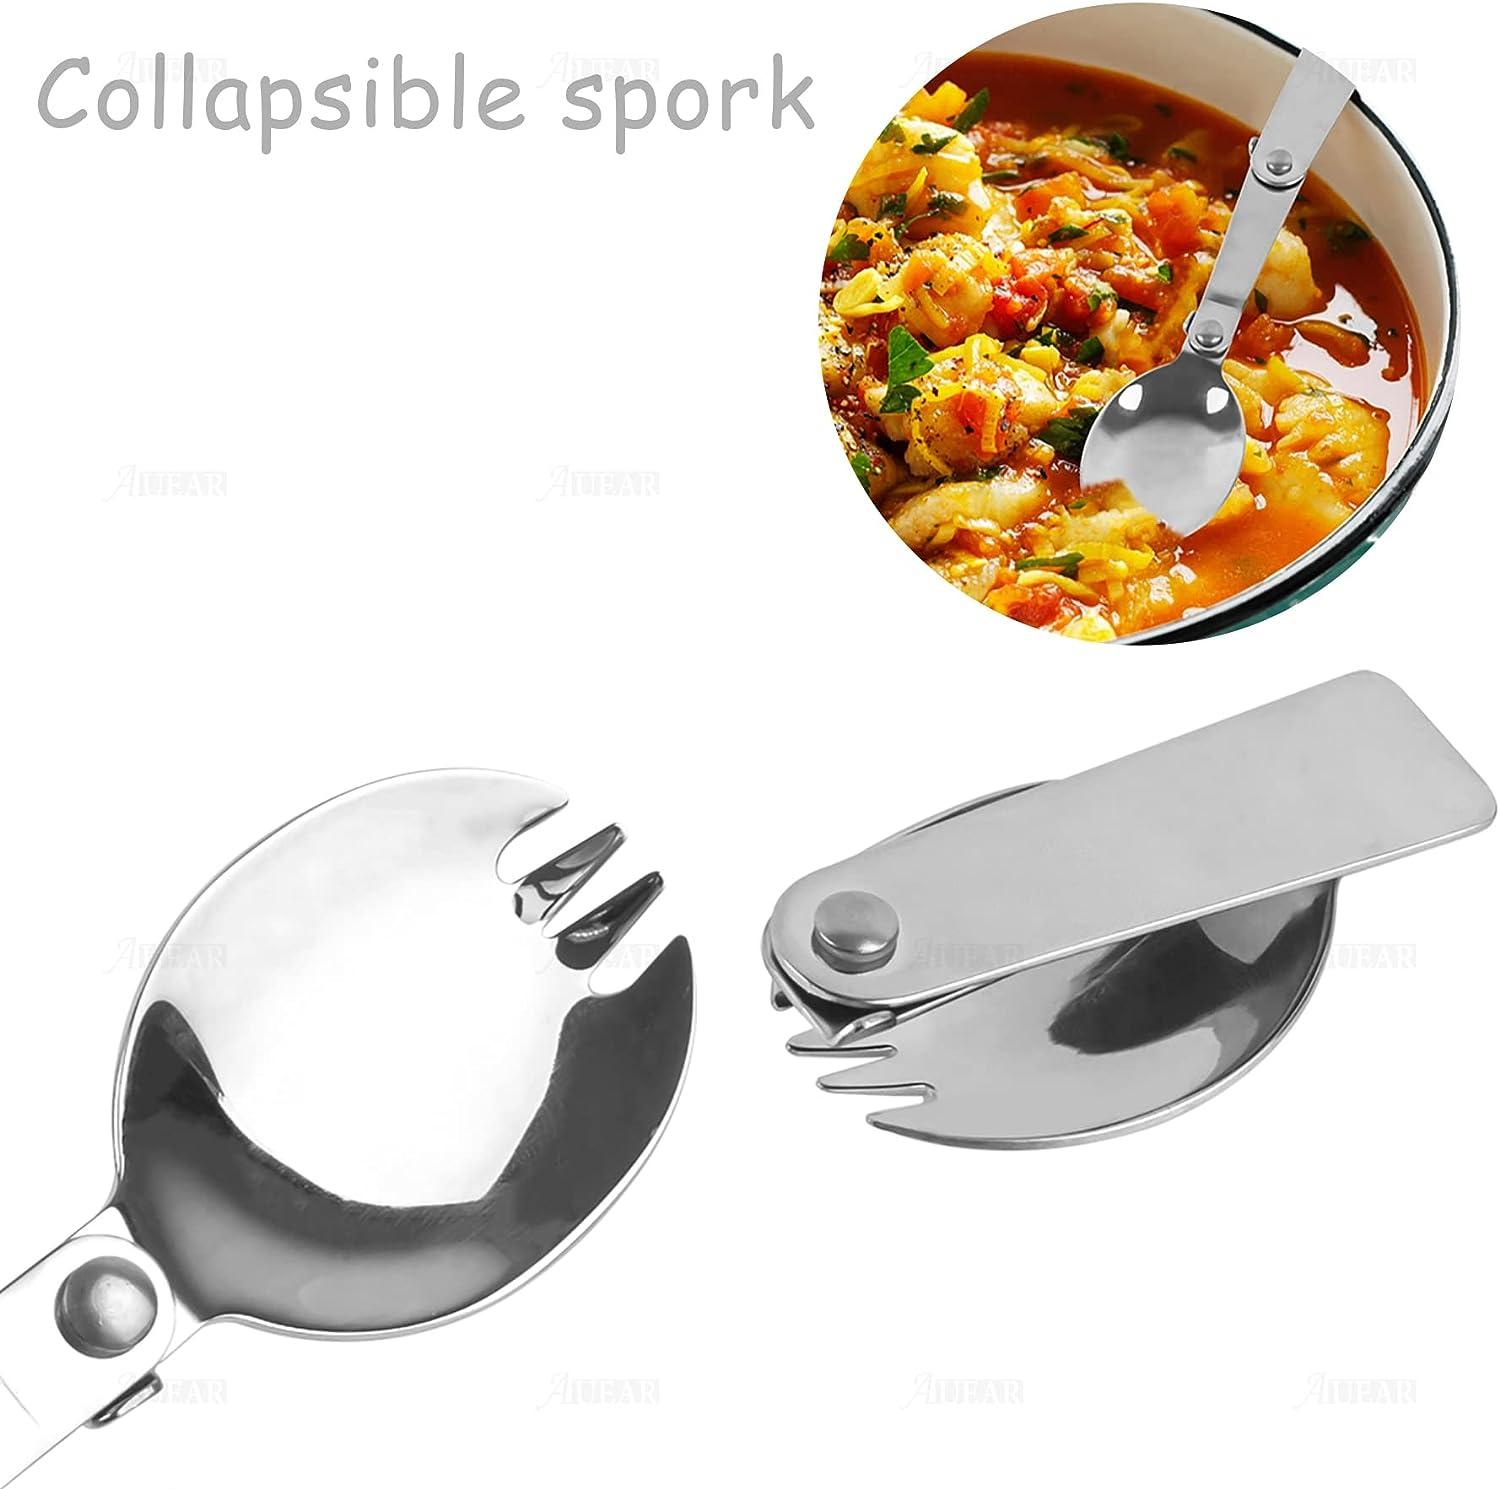 Thermos Replacement Spoons Stainless Steel Collapsible Camping